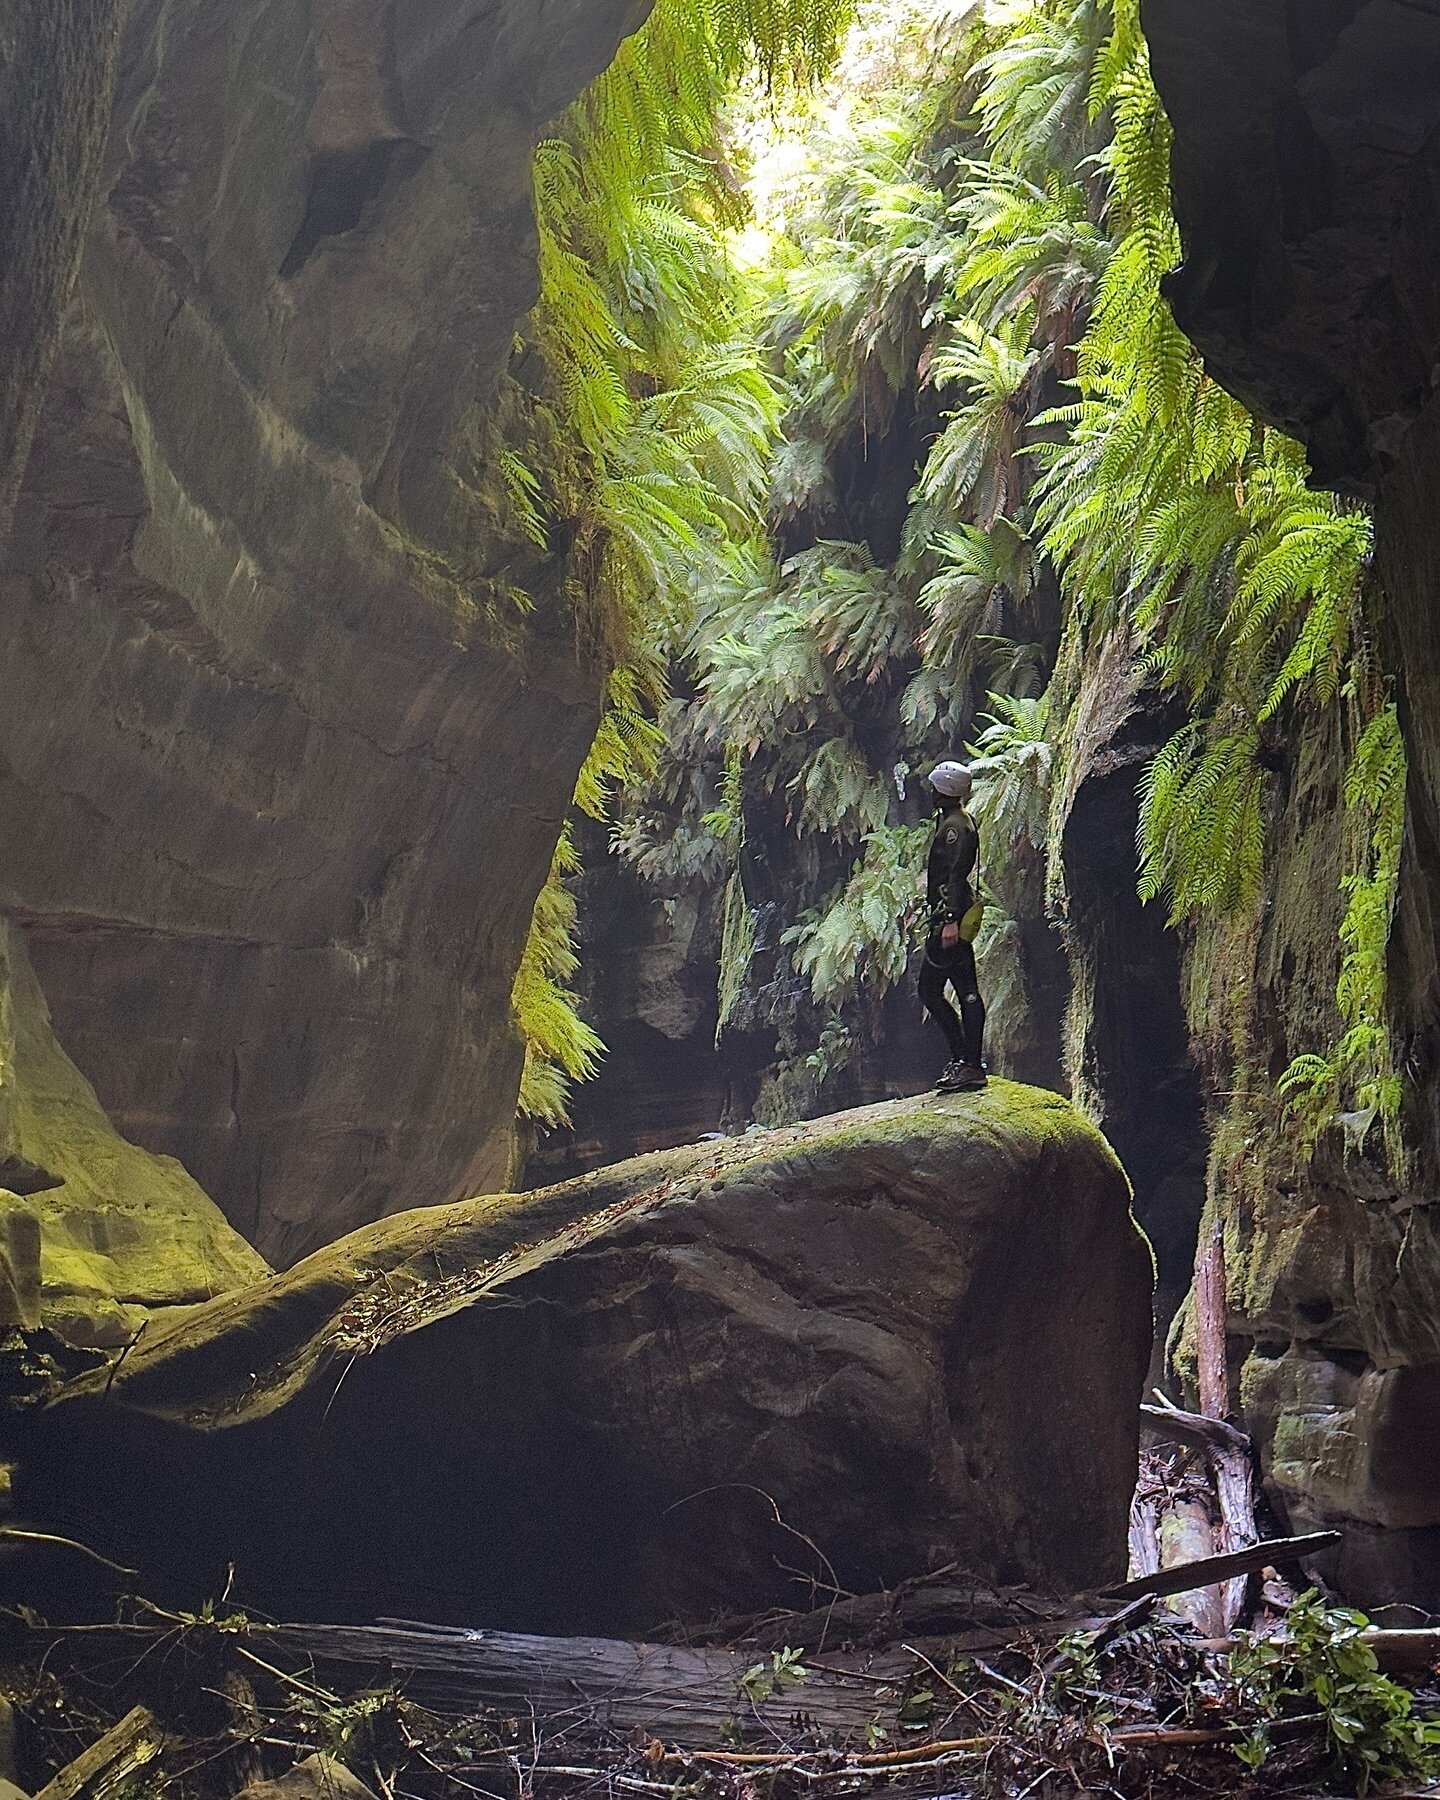 Claustral Canyon, matching colours. Happy New Year everyone. 

#canyoning #canyonisme #canyoningadventure #canyoningtour#canyoningiswhatwedo #canyoningaustralia #canyoningphotography #roamguides #canyonguide #canyoneering #roamguides #roamadventures 